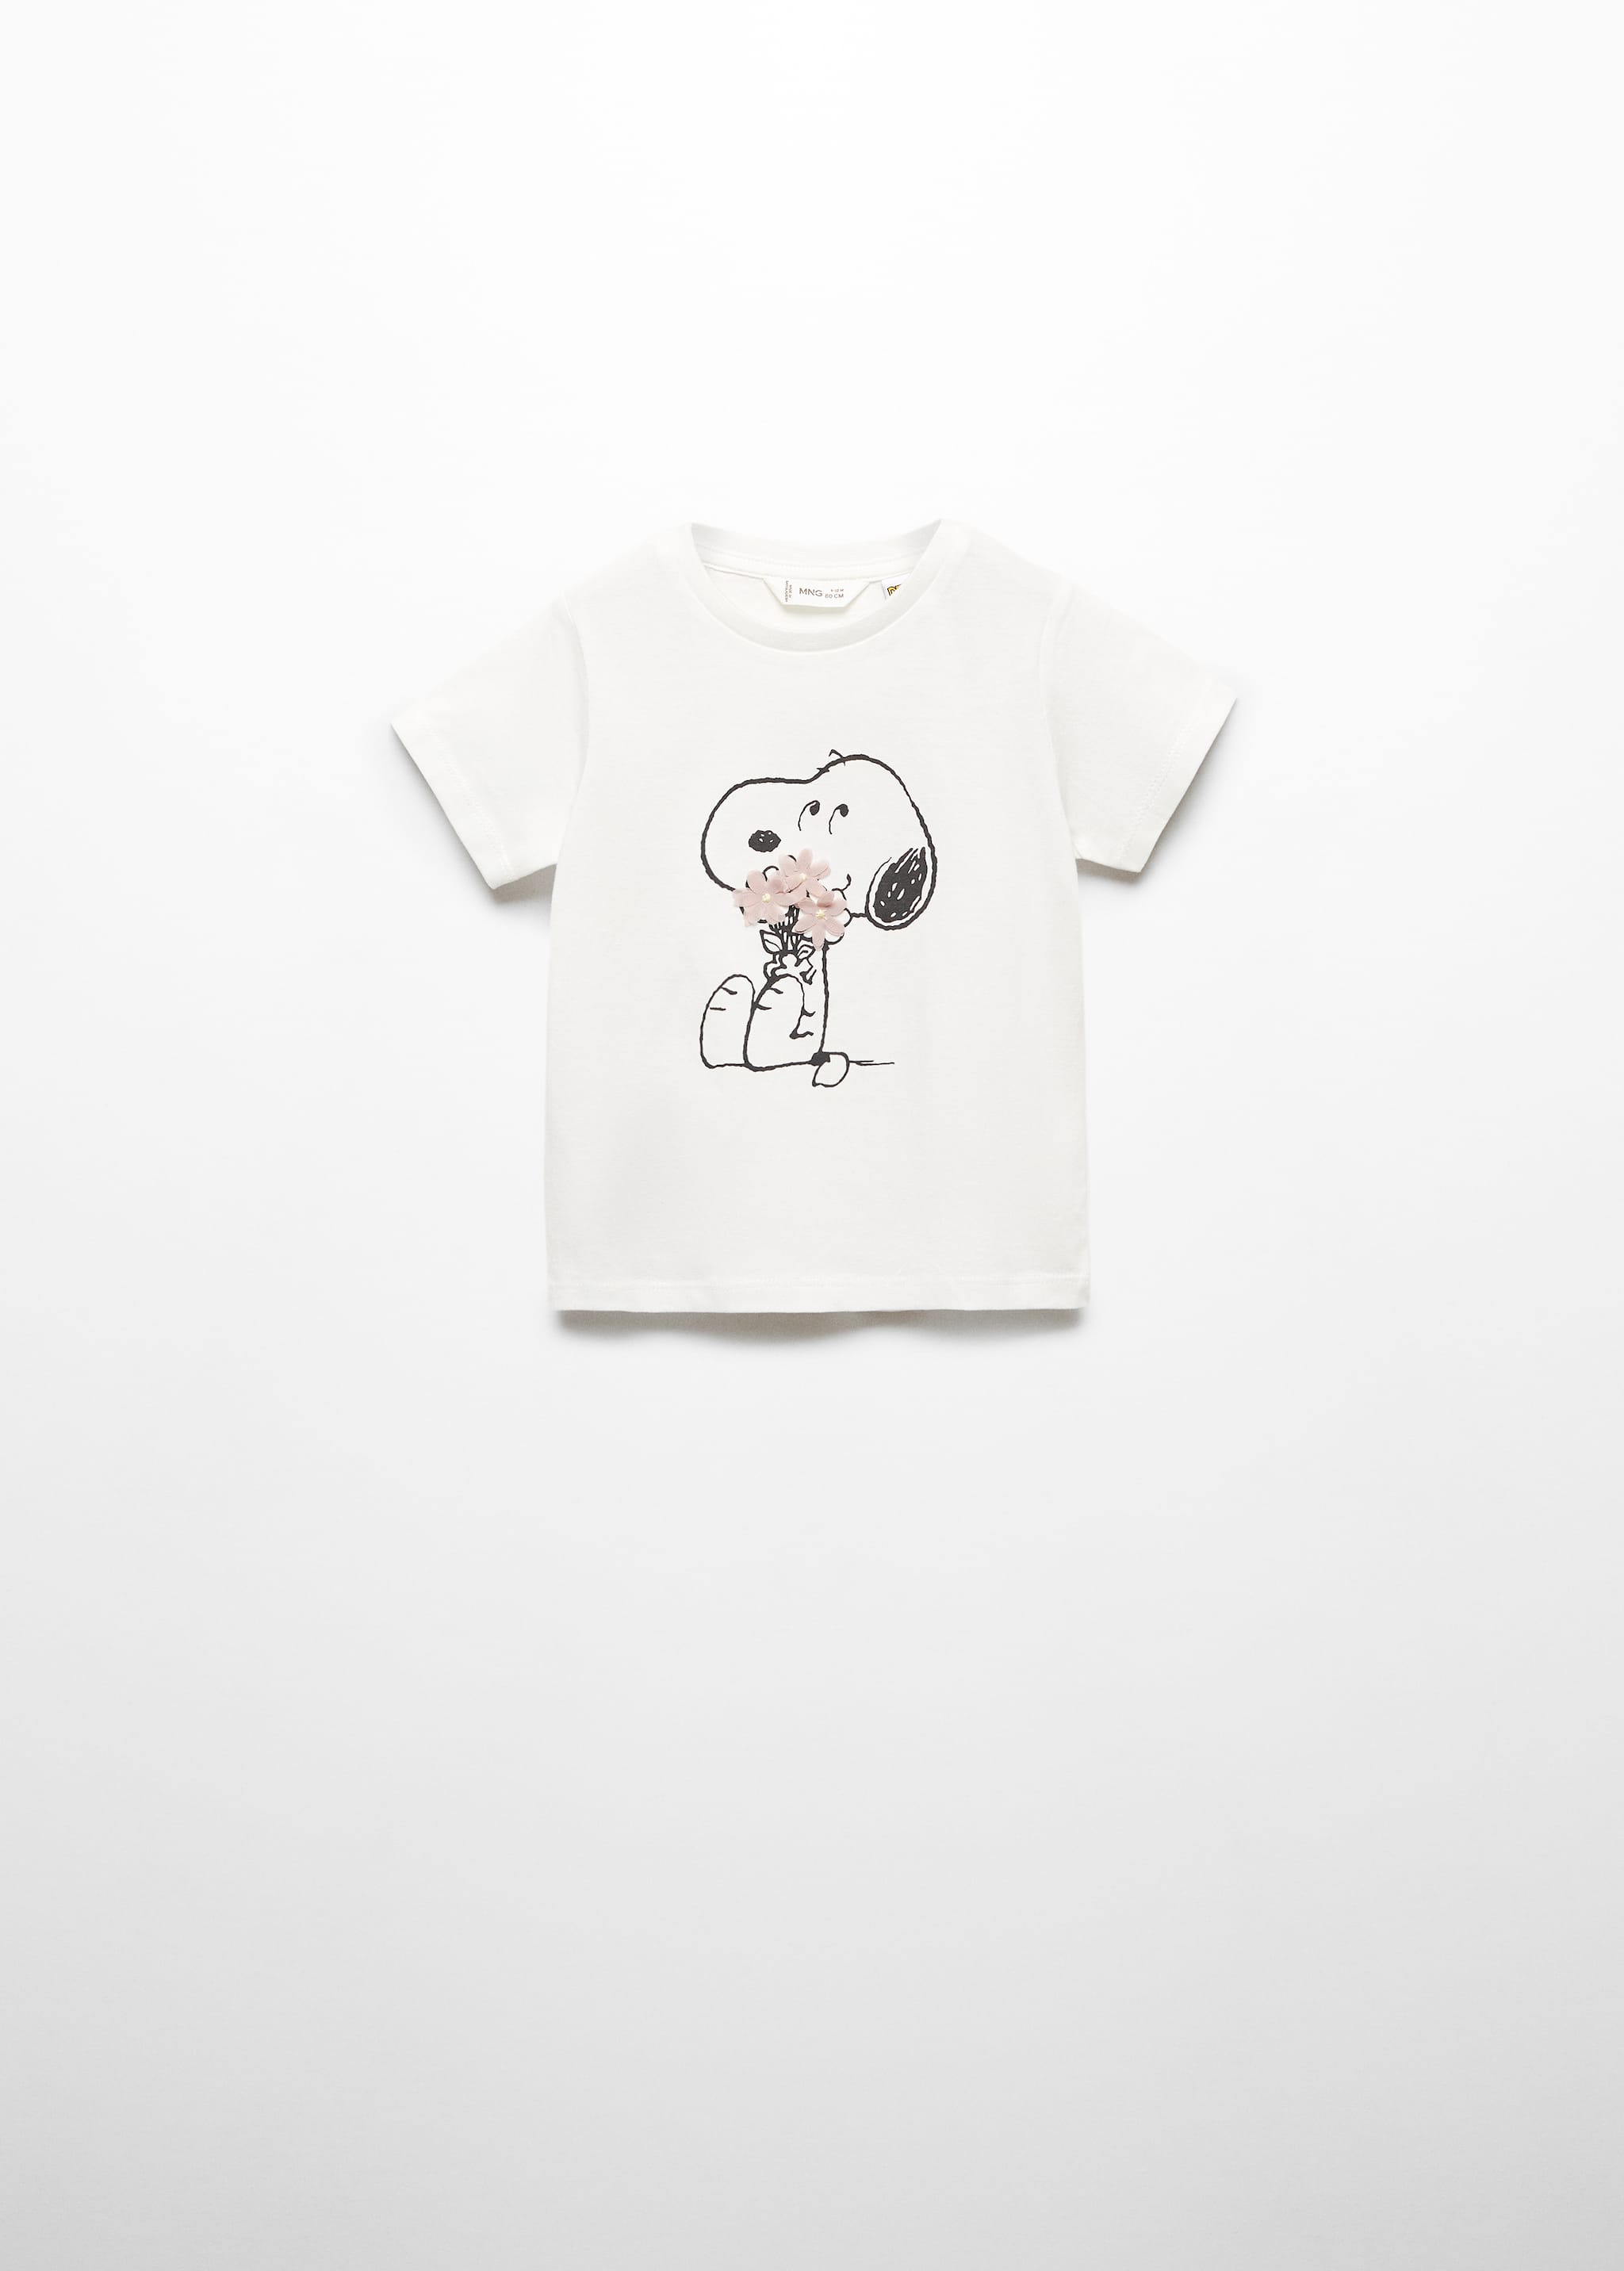 Snoopy printed t-shirt - Article without model